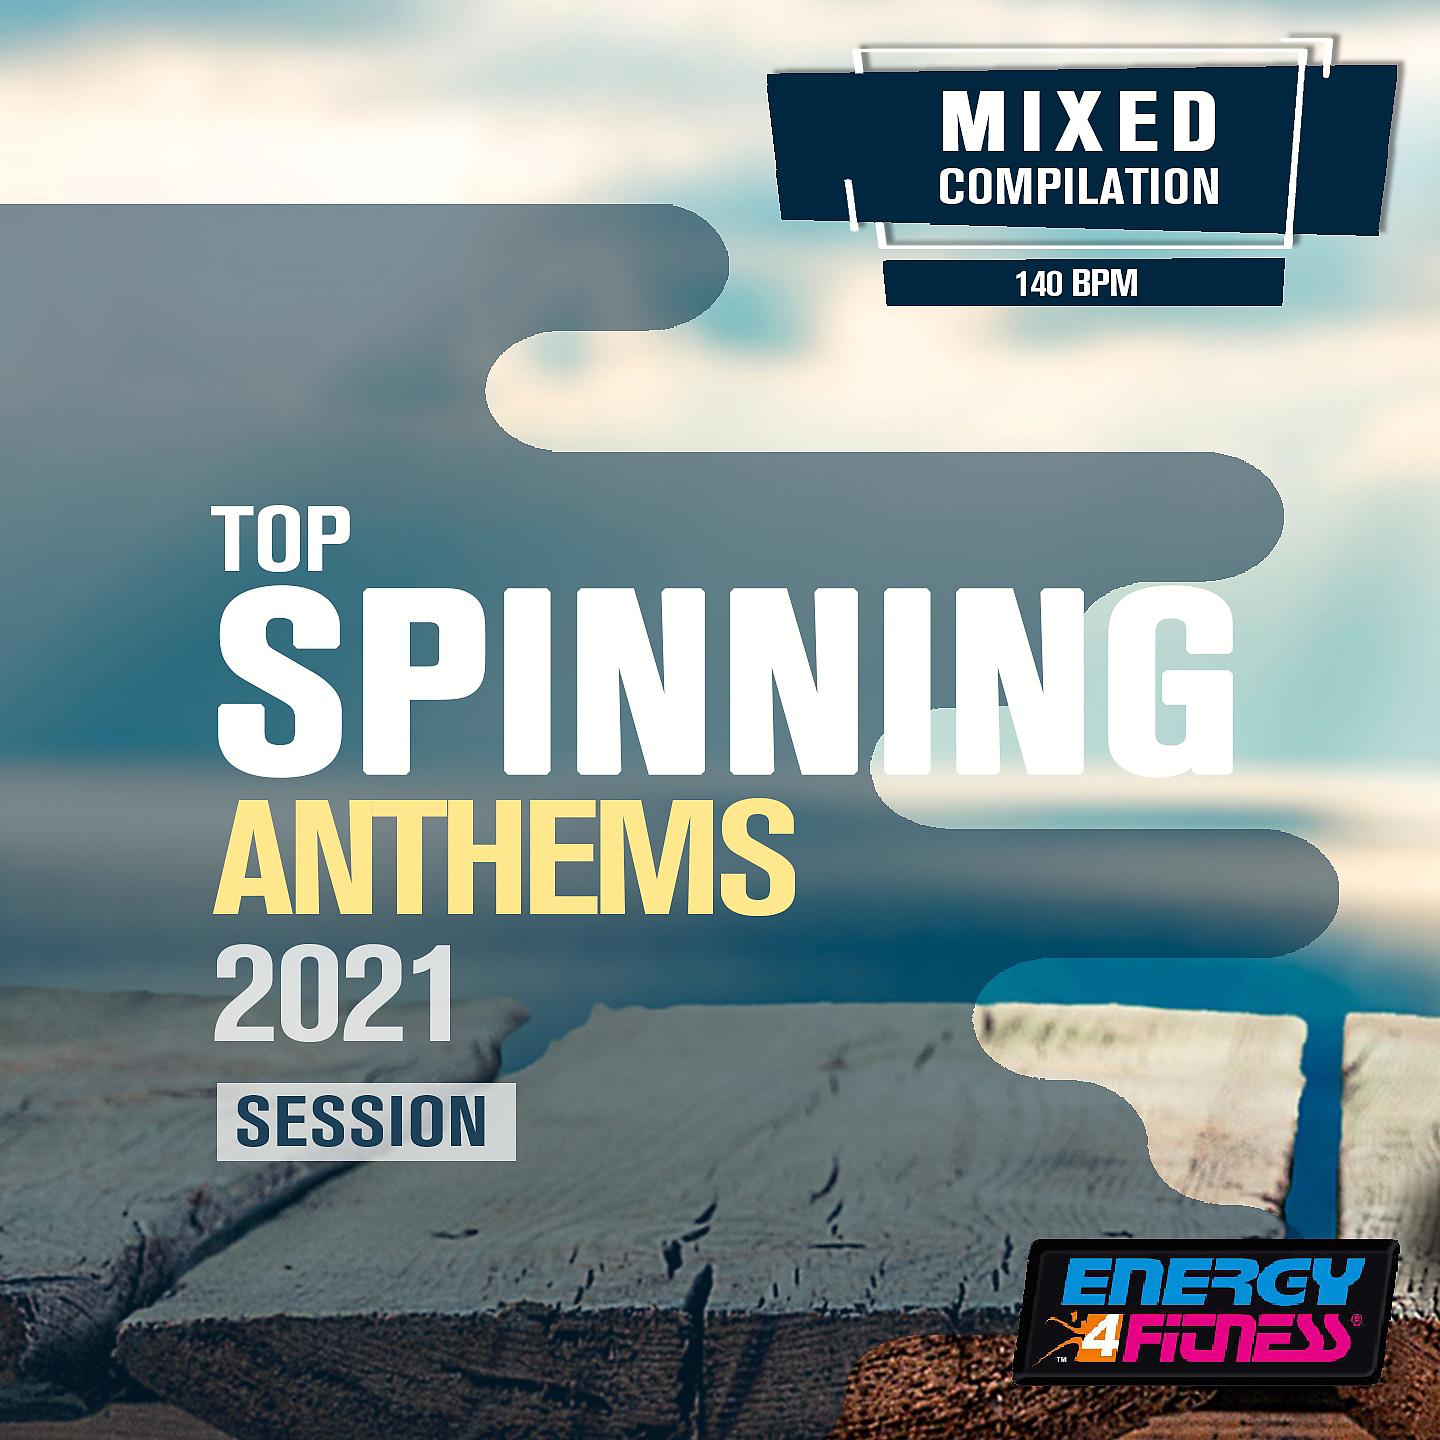 Groove 55 - Planet session (2021). Anthems anrtax. X minus top минус